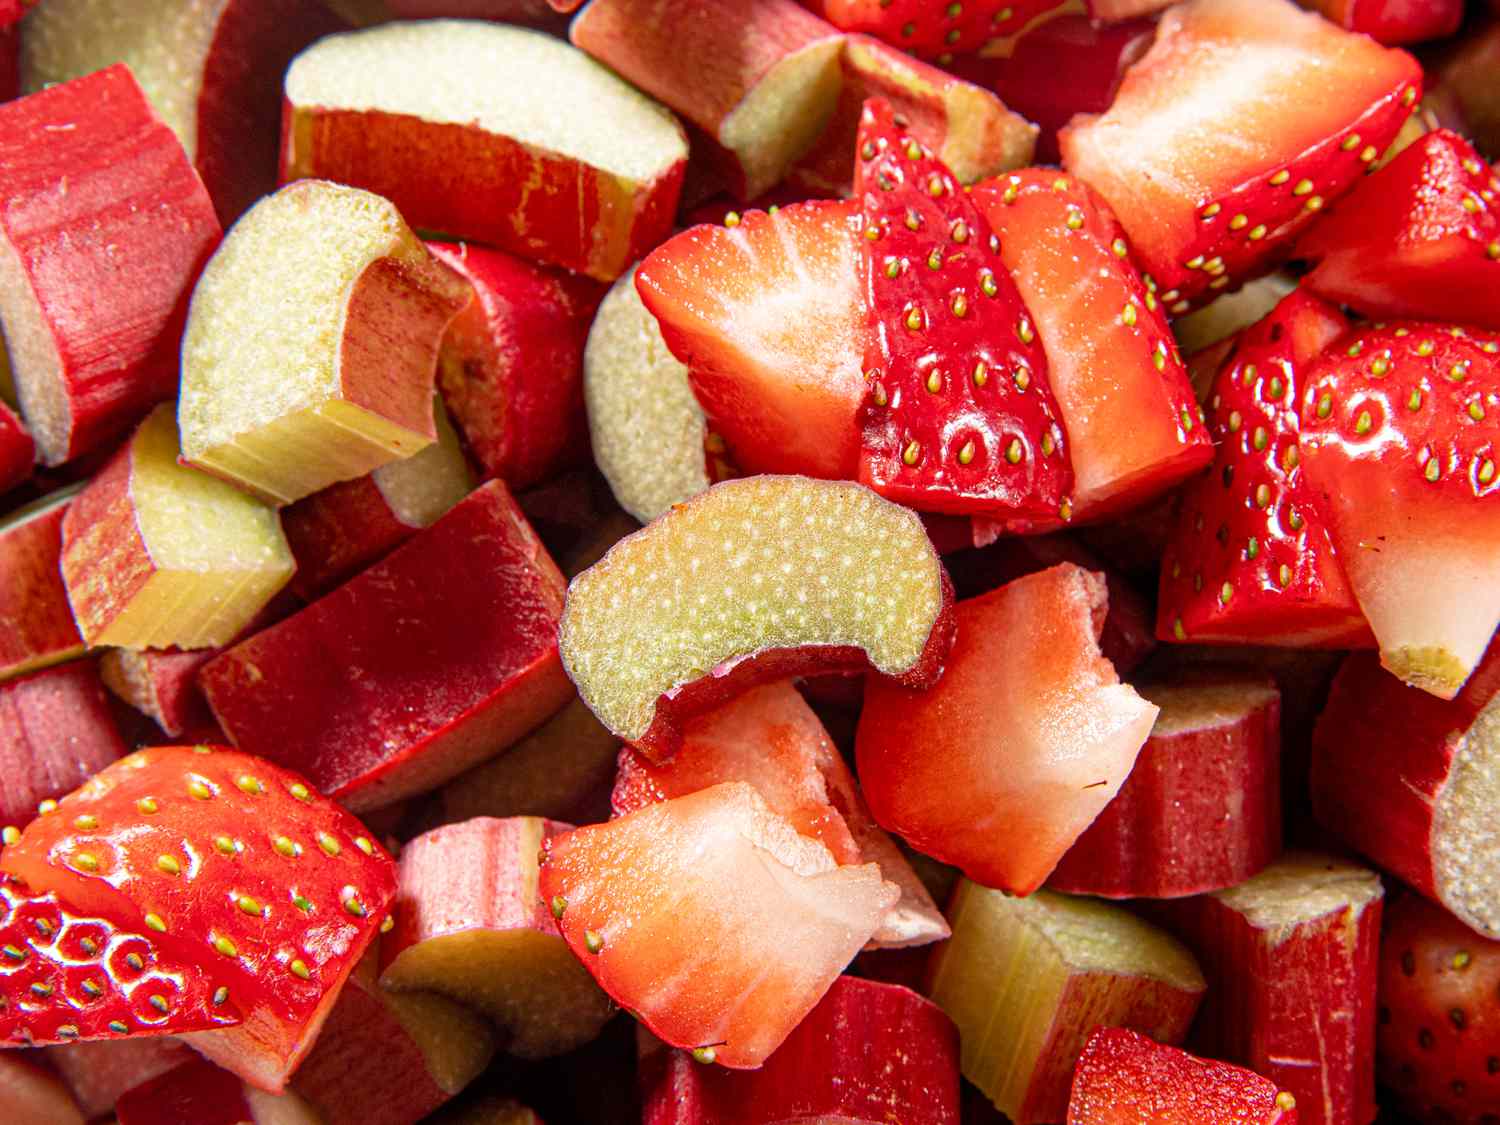 Close up of rhubarb and strawberries